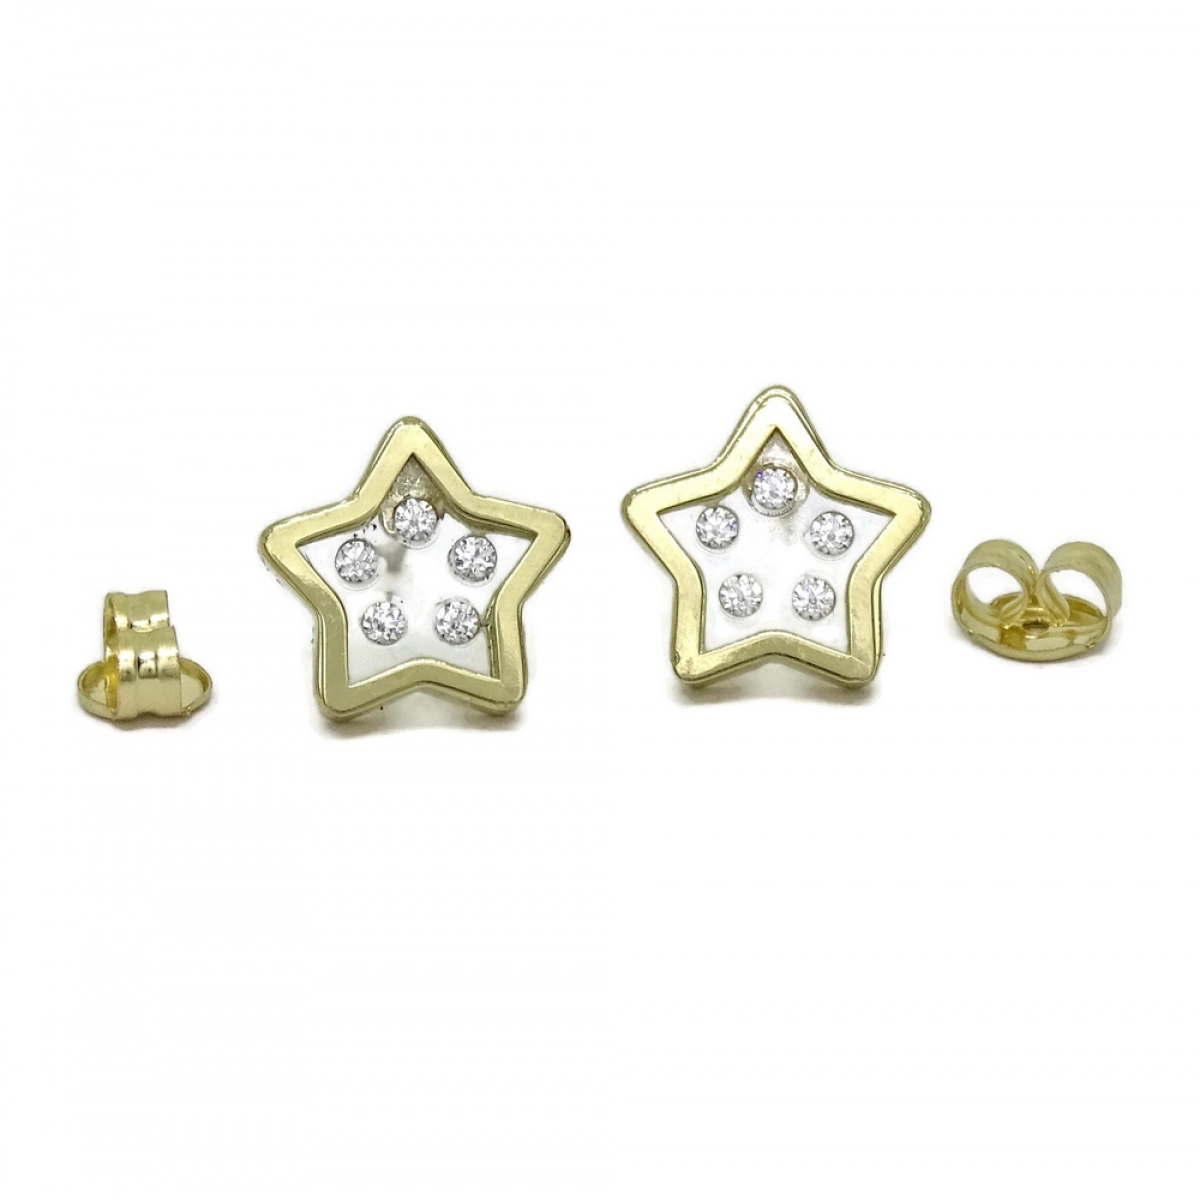 OUTSTANDING STAR OF 18K YELLOW GOLD WITH 10 ZIRCONS OF THE BEST QUALITY NEVER SAY NEVER